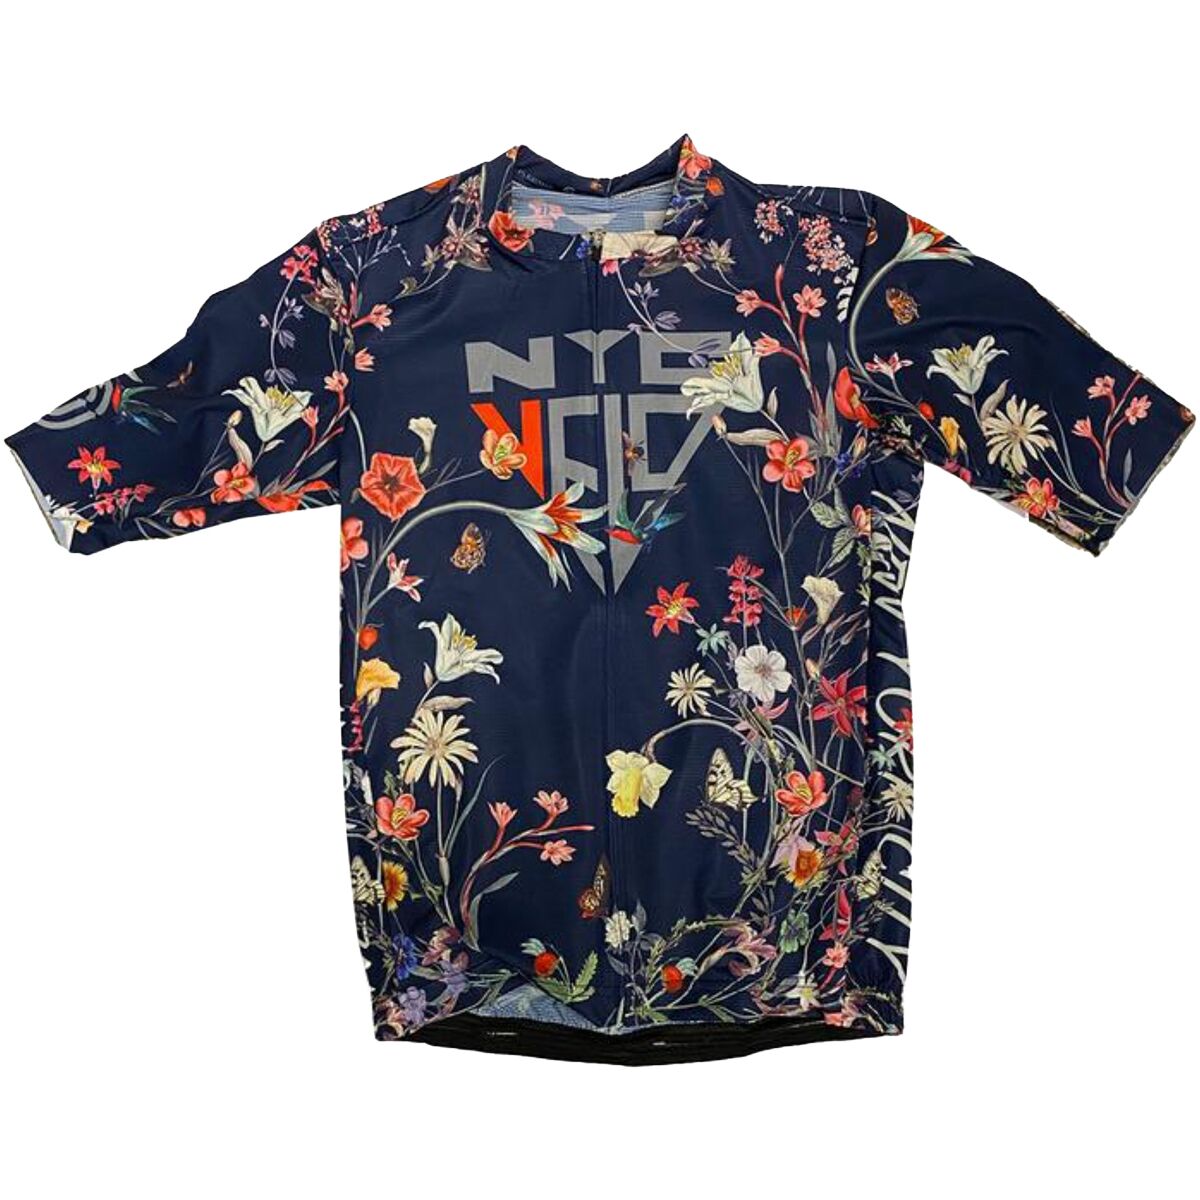 Ostroy Floral Jersey - Women's